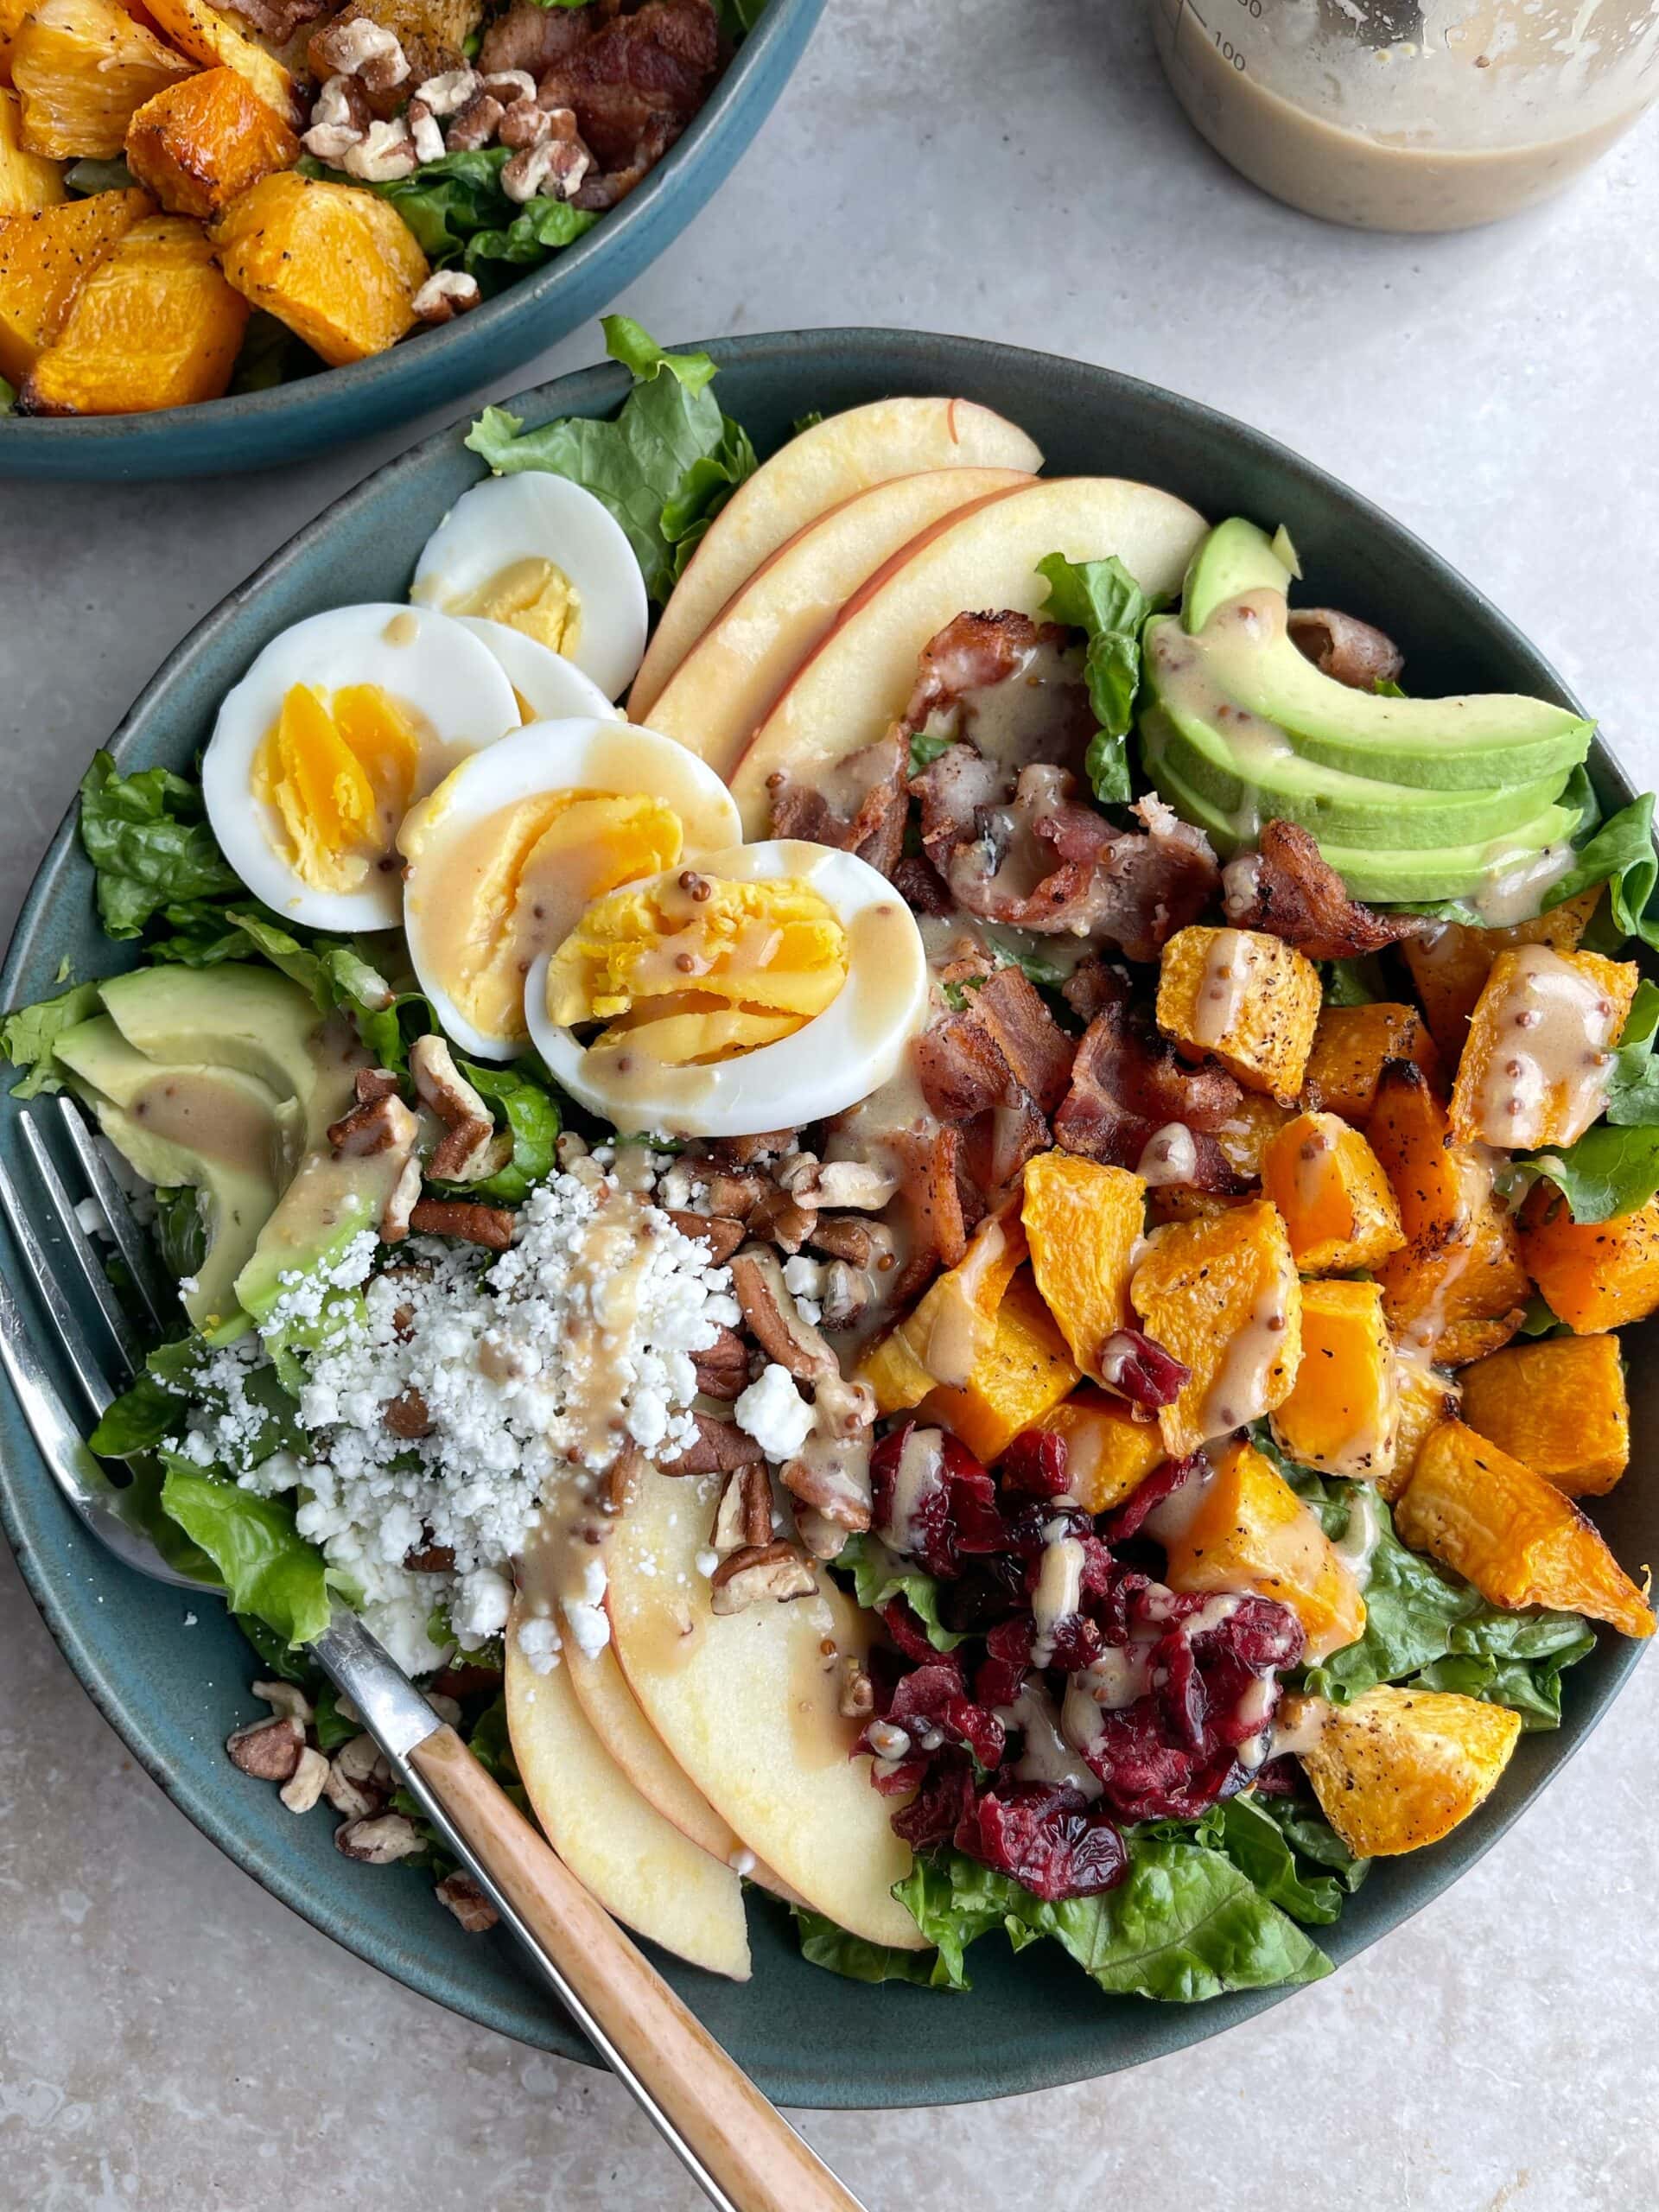 Harvest Cobb Salad close up with boiled eggs, avocado, bacon, goat cheese, butternut squash and apple.